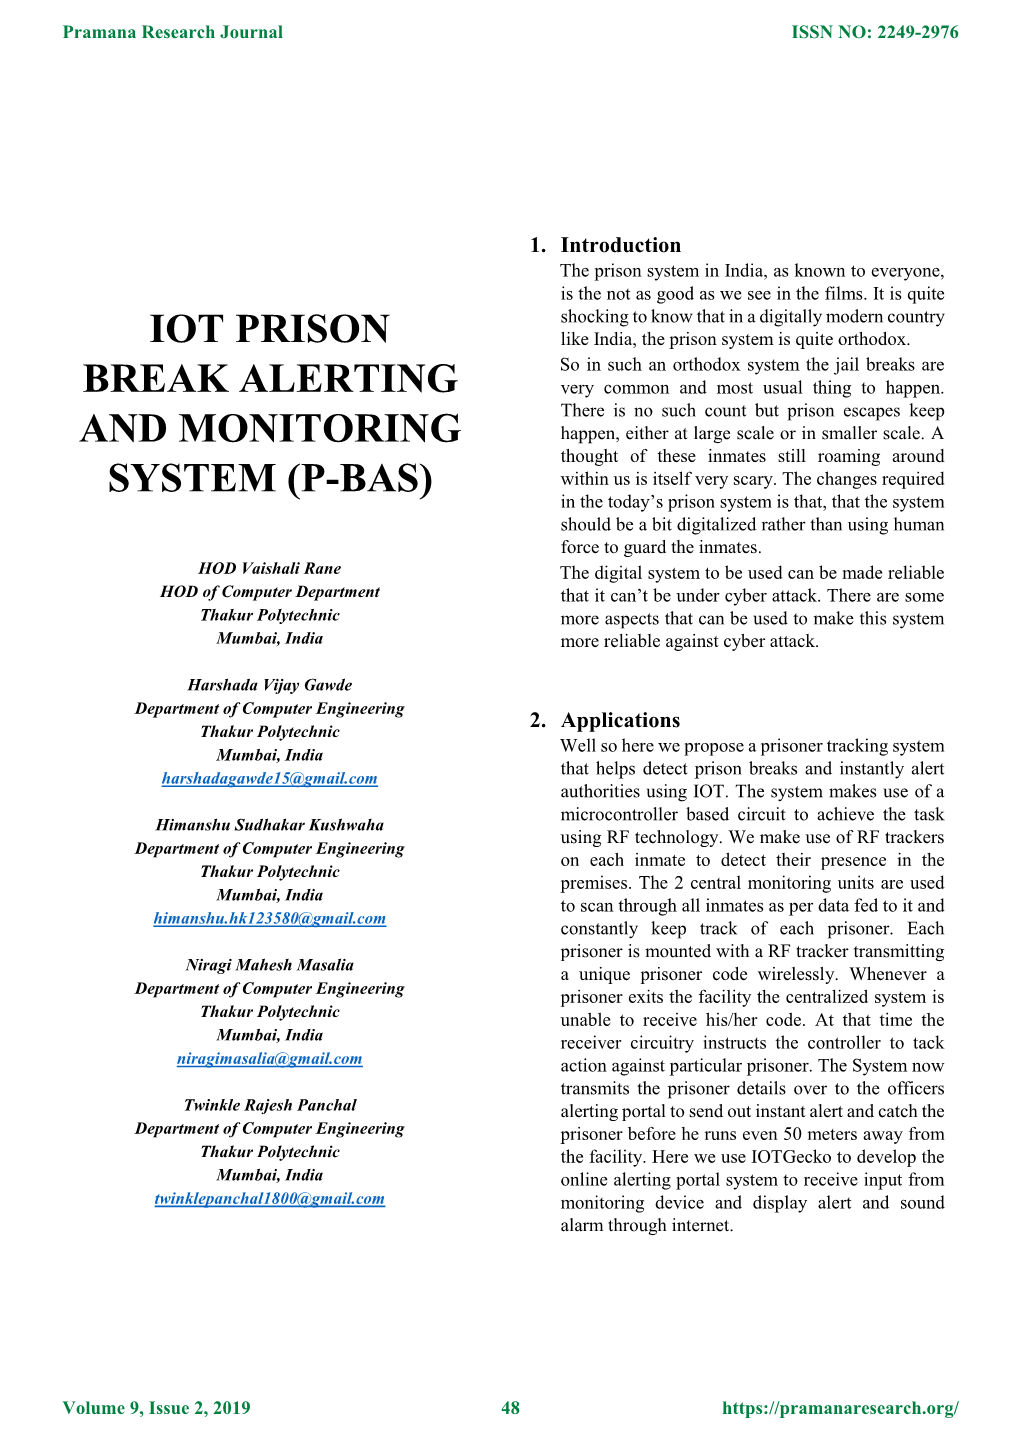 Iot Prison Break Alerting and Monitoring System (P-Bas)